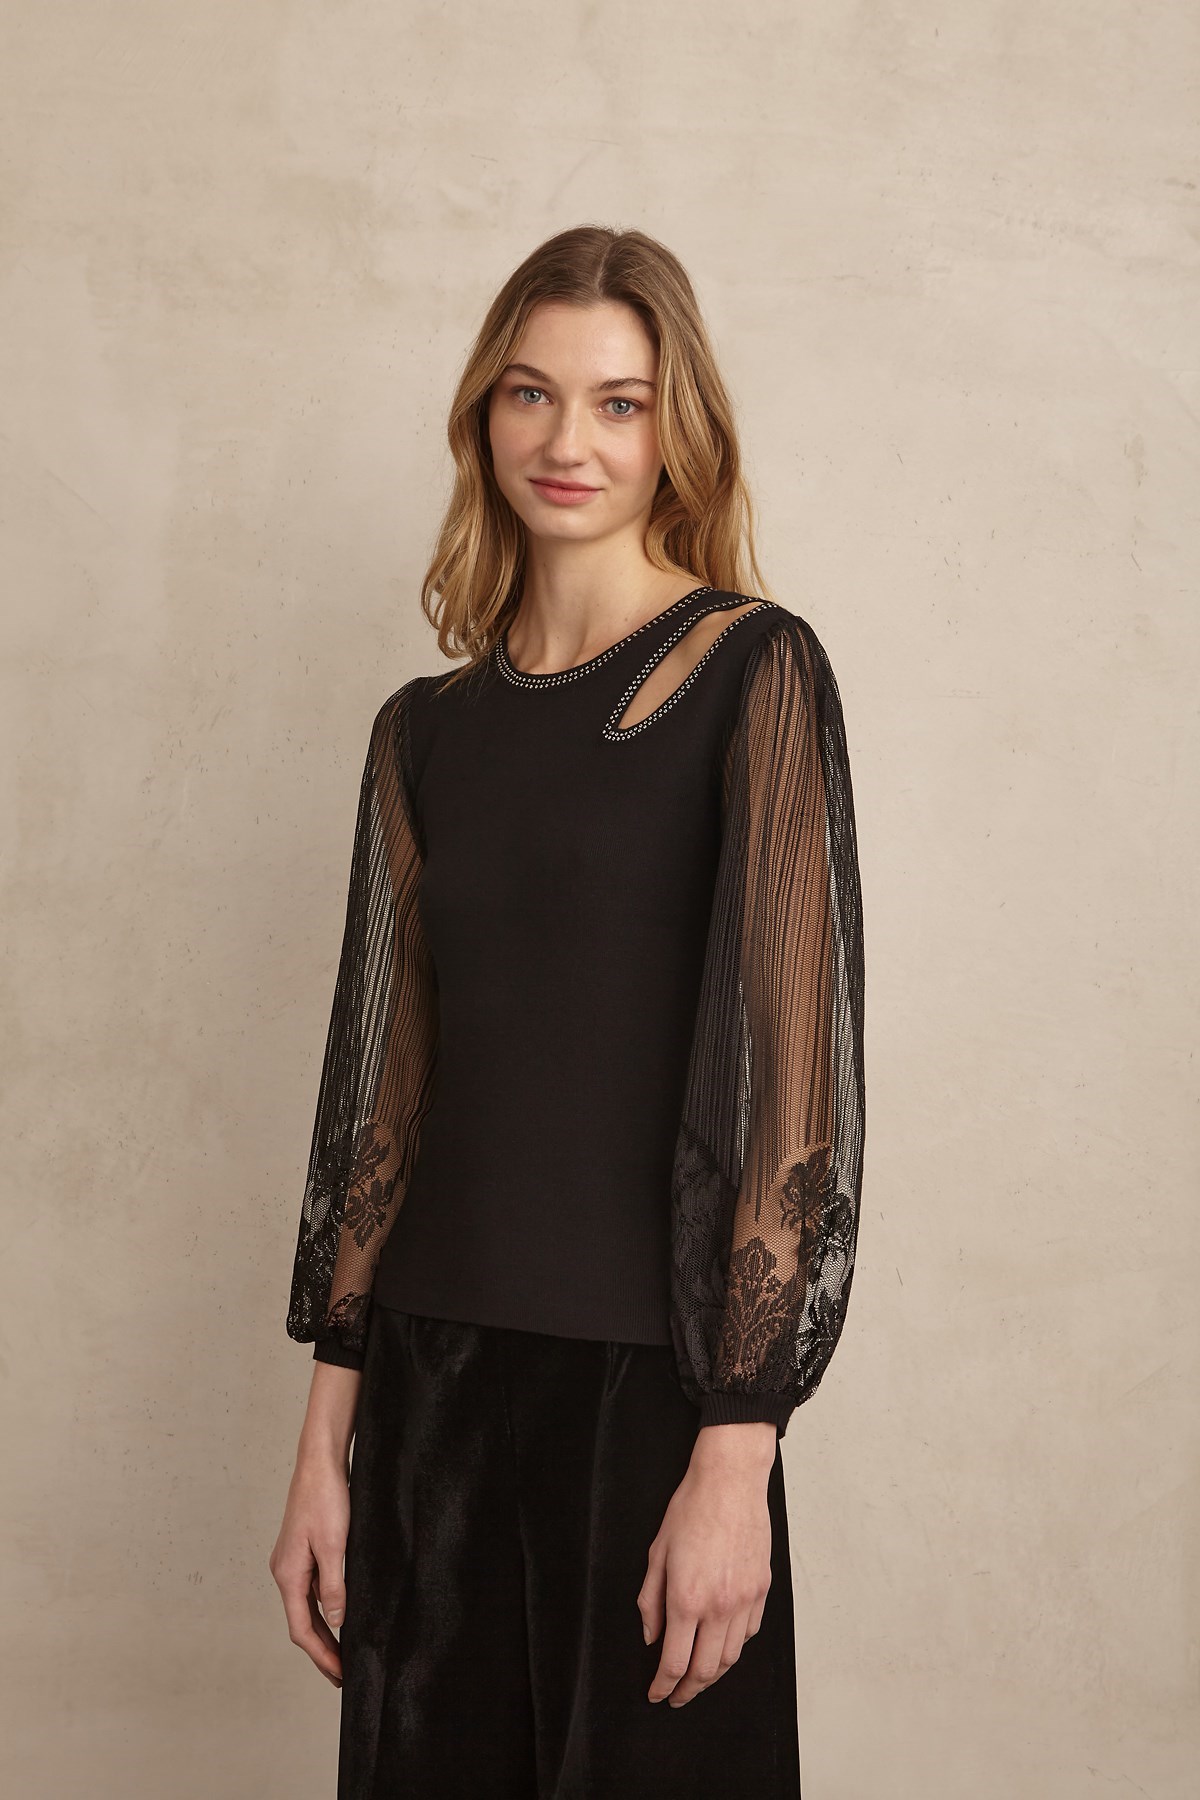 Bi-Material Round-Neck with Fitted Bodice with Cutout and Oversized Puffed Sleeves